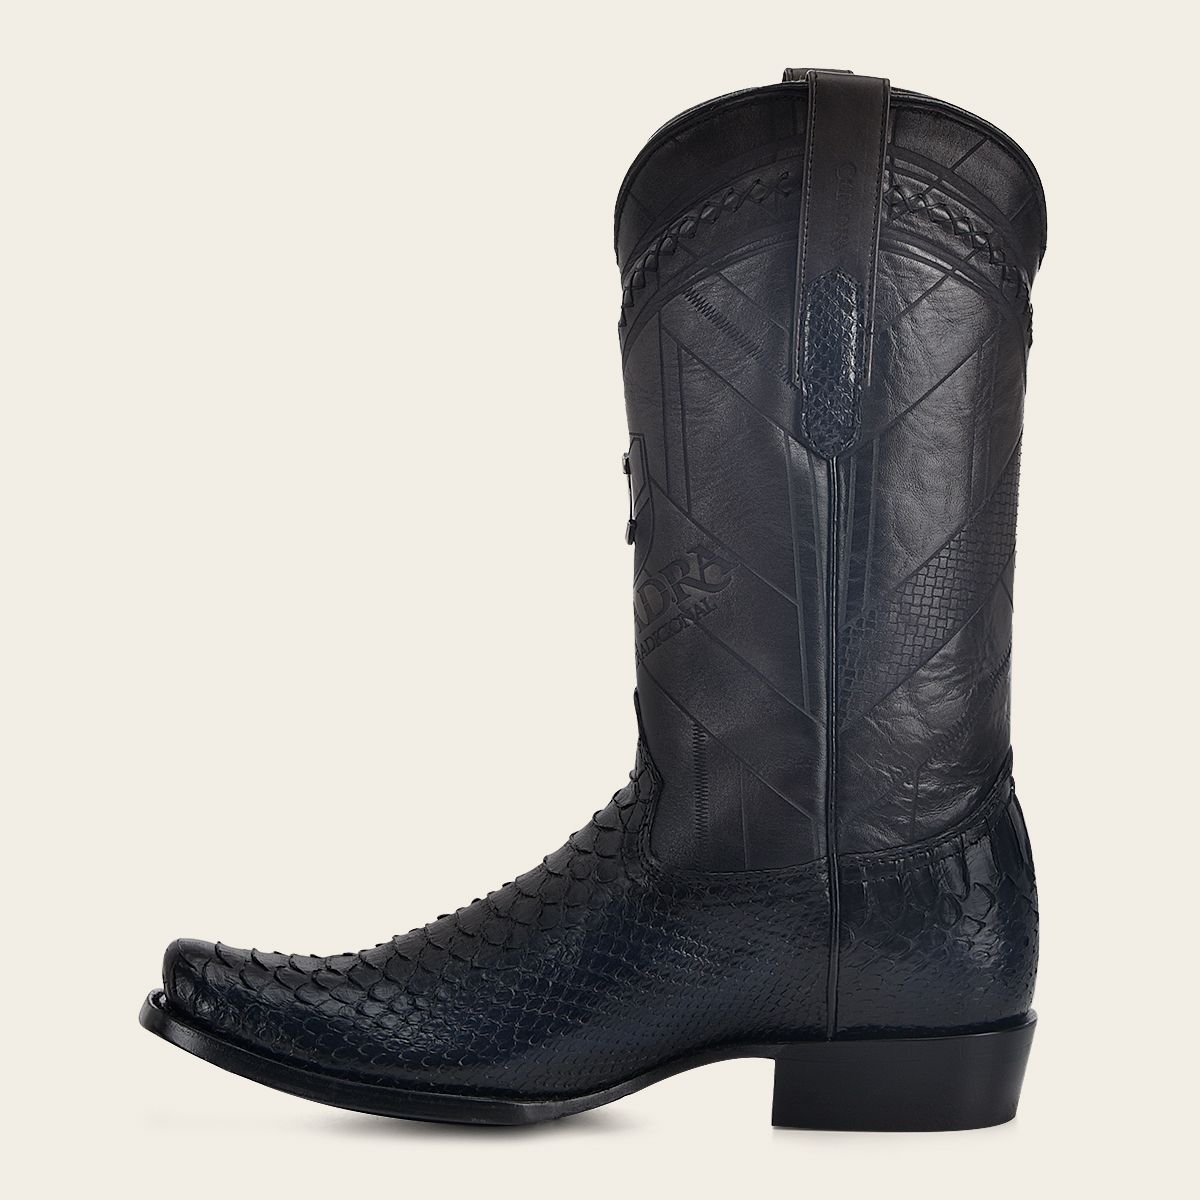 Hand-painted traditional blue python leather boot - 1J2FPH - Cuadra Shop